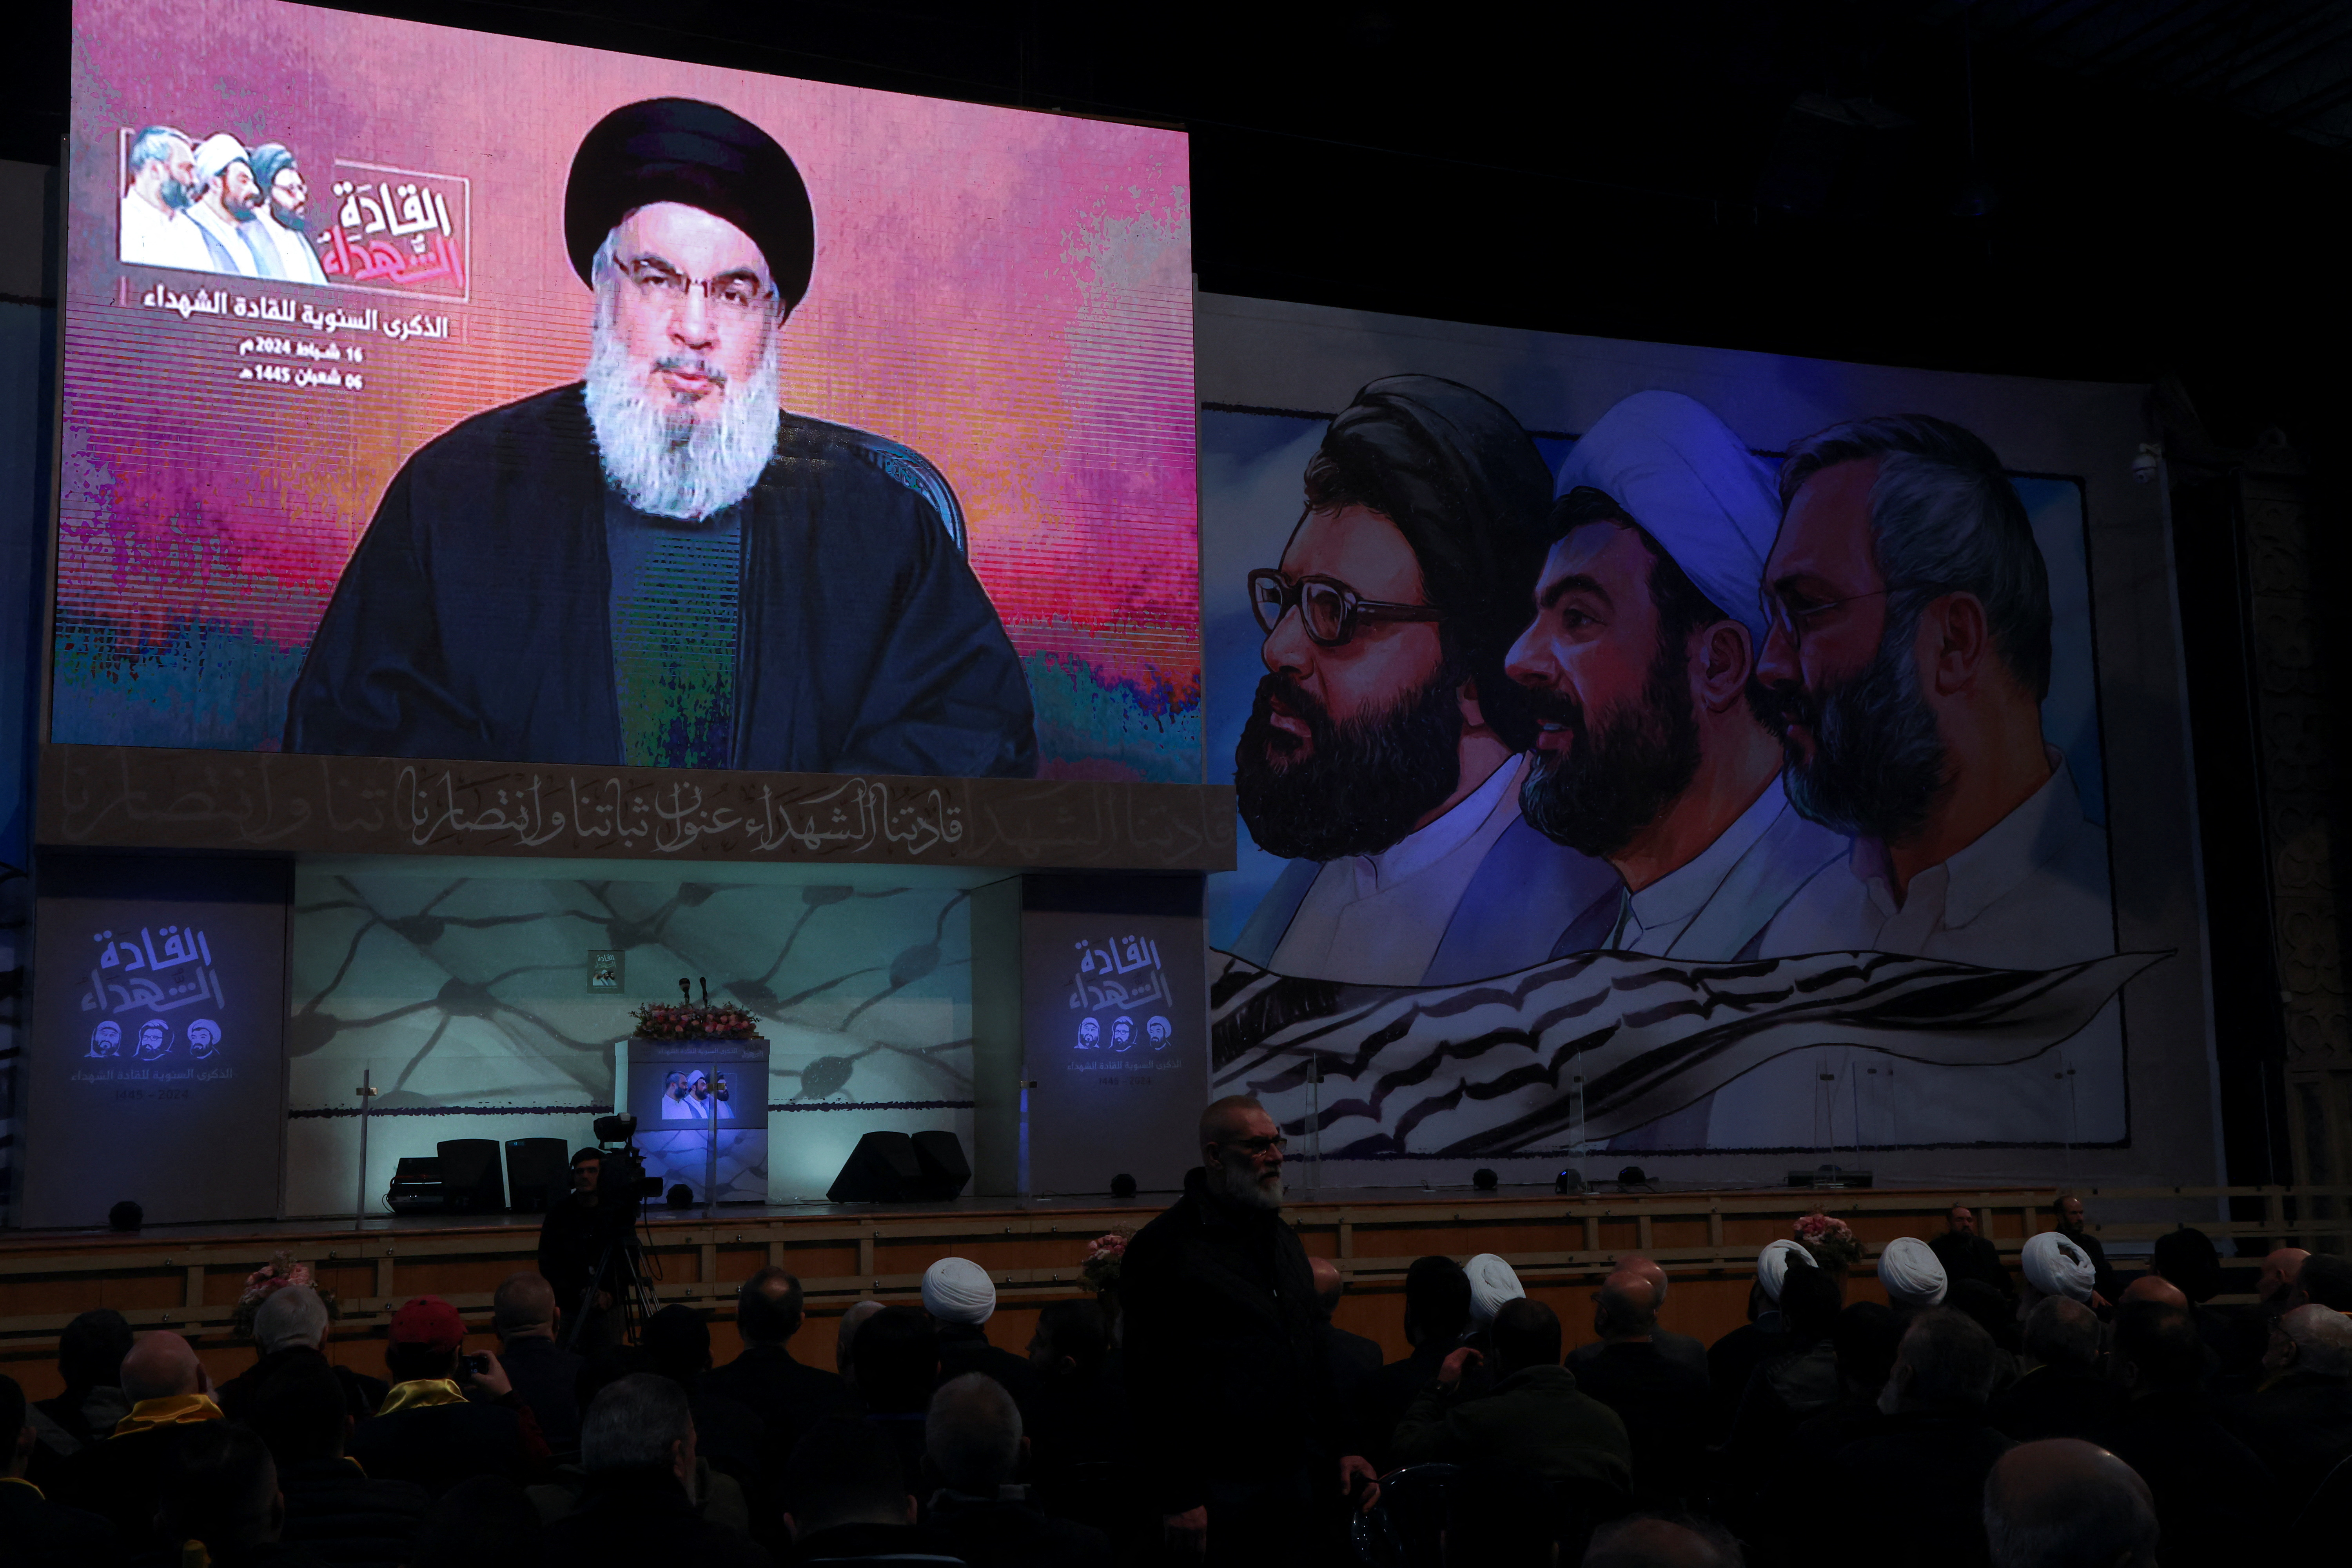 Lebanon's Hezbollah leader Sayyed Hassan Nasrallah gives a televised address during a rally in Beirut's southern suburbs